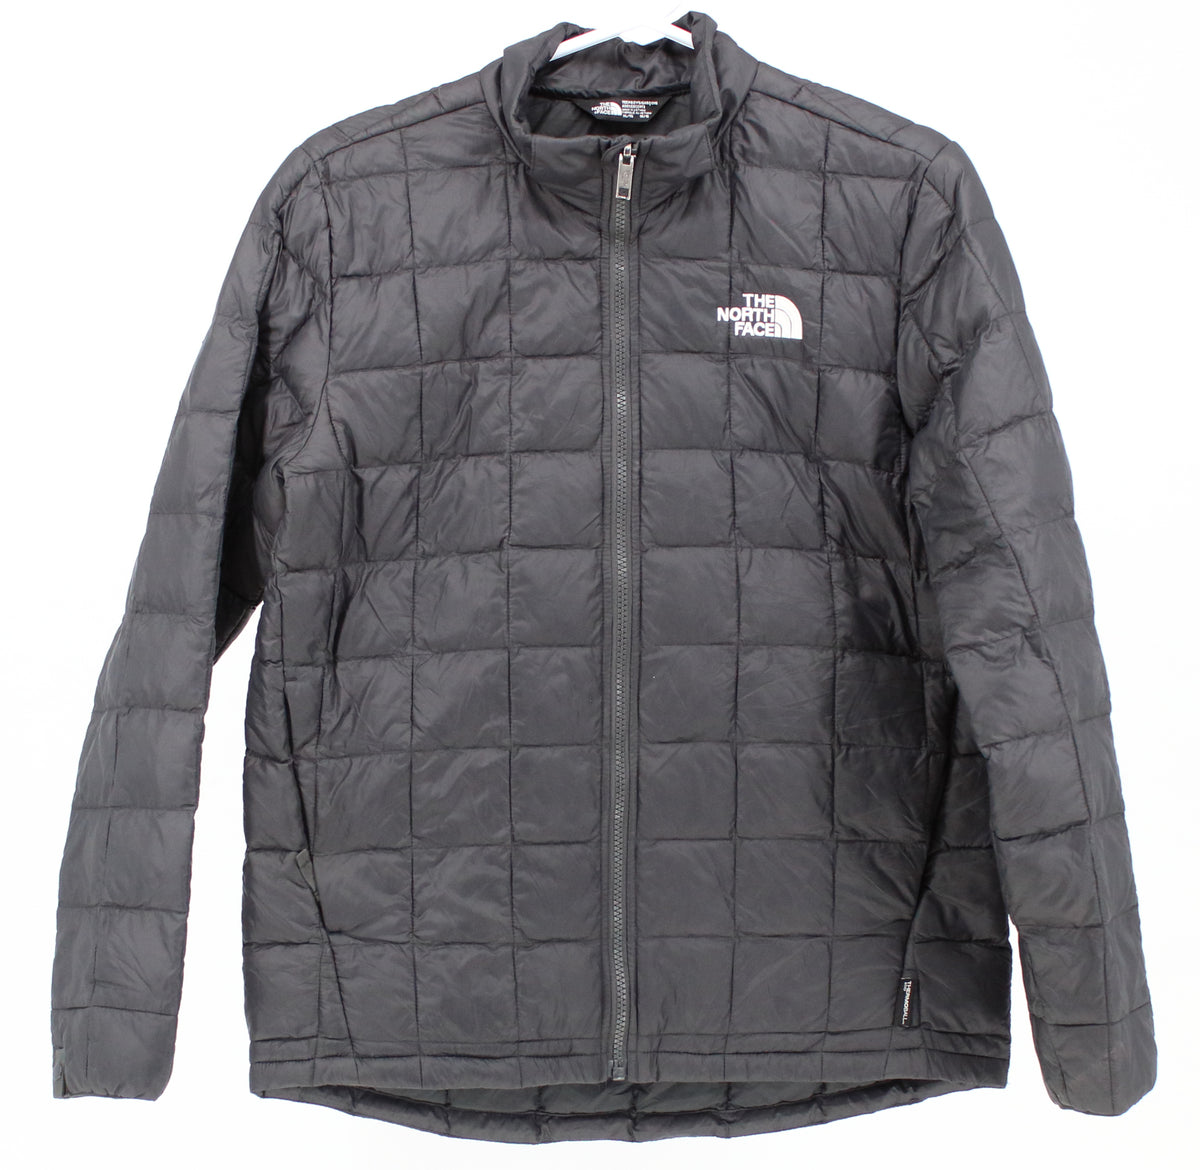 The North Face Black Thermoball Kids Jacket